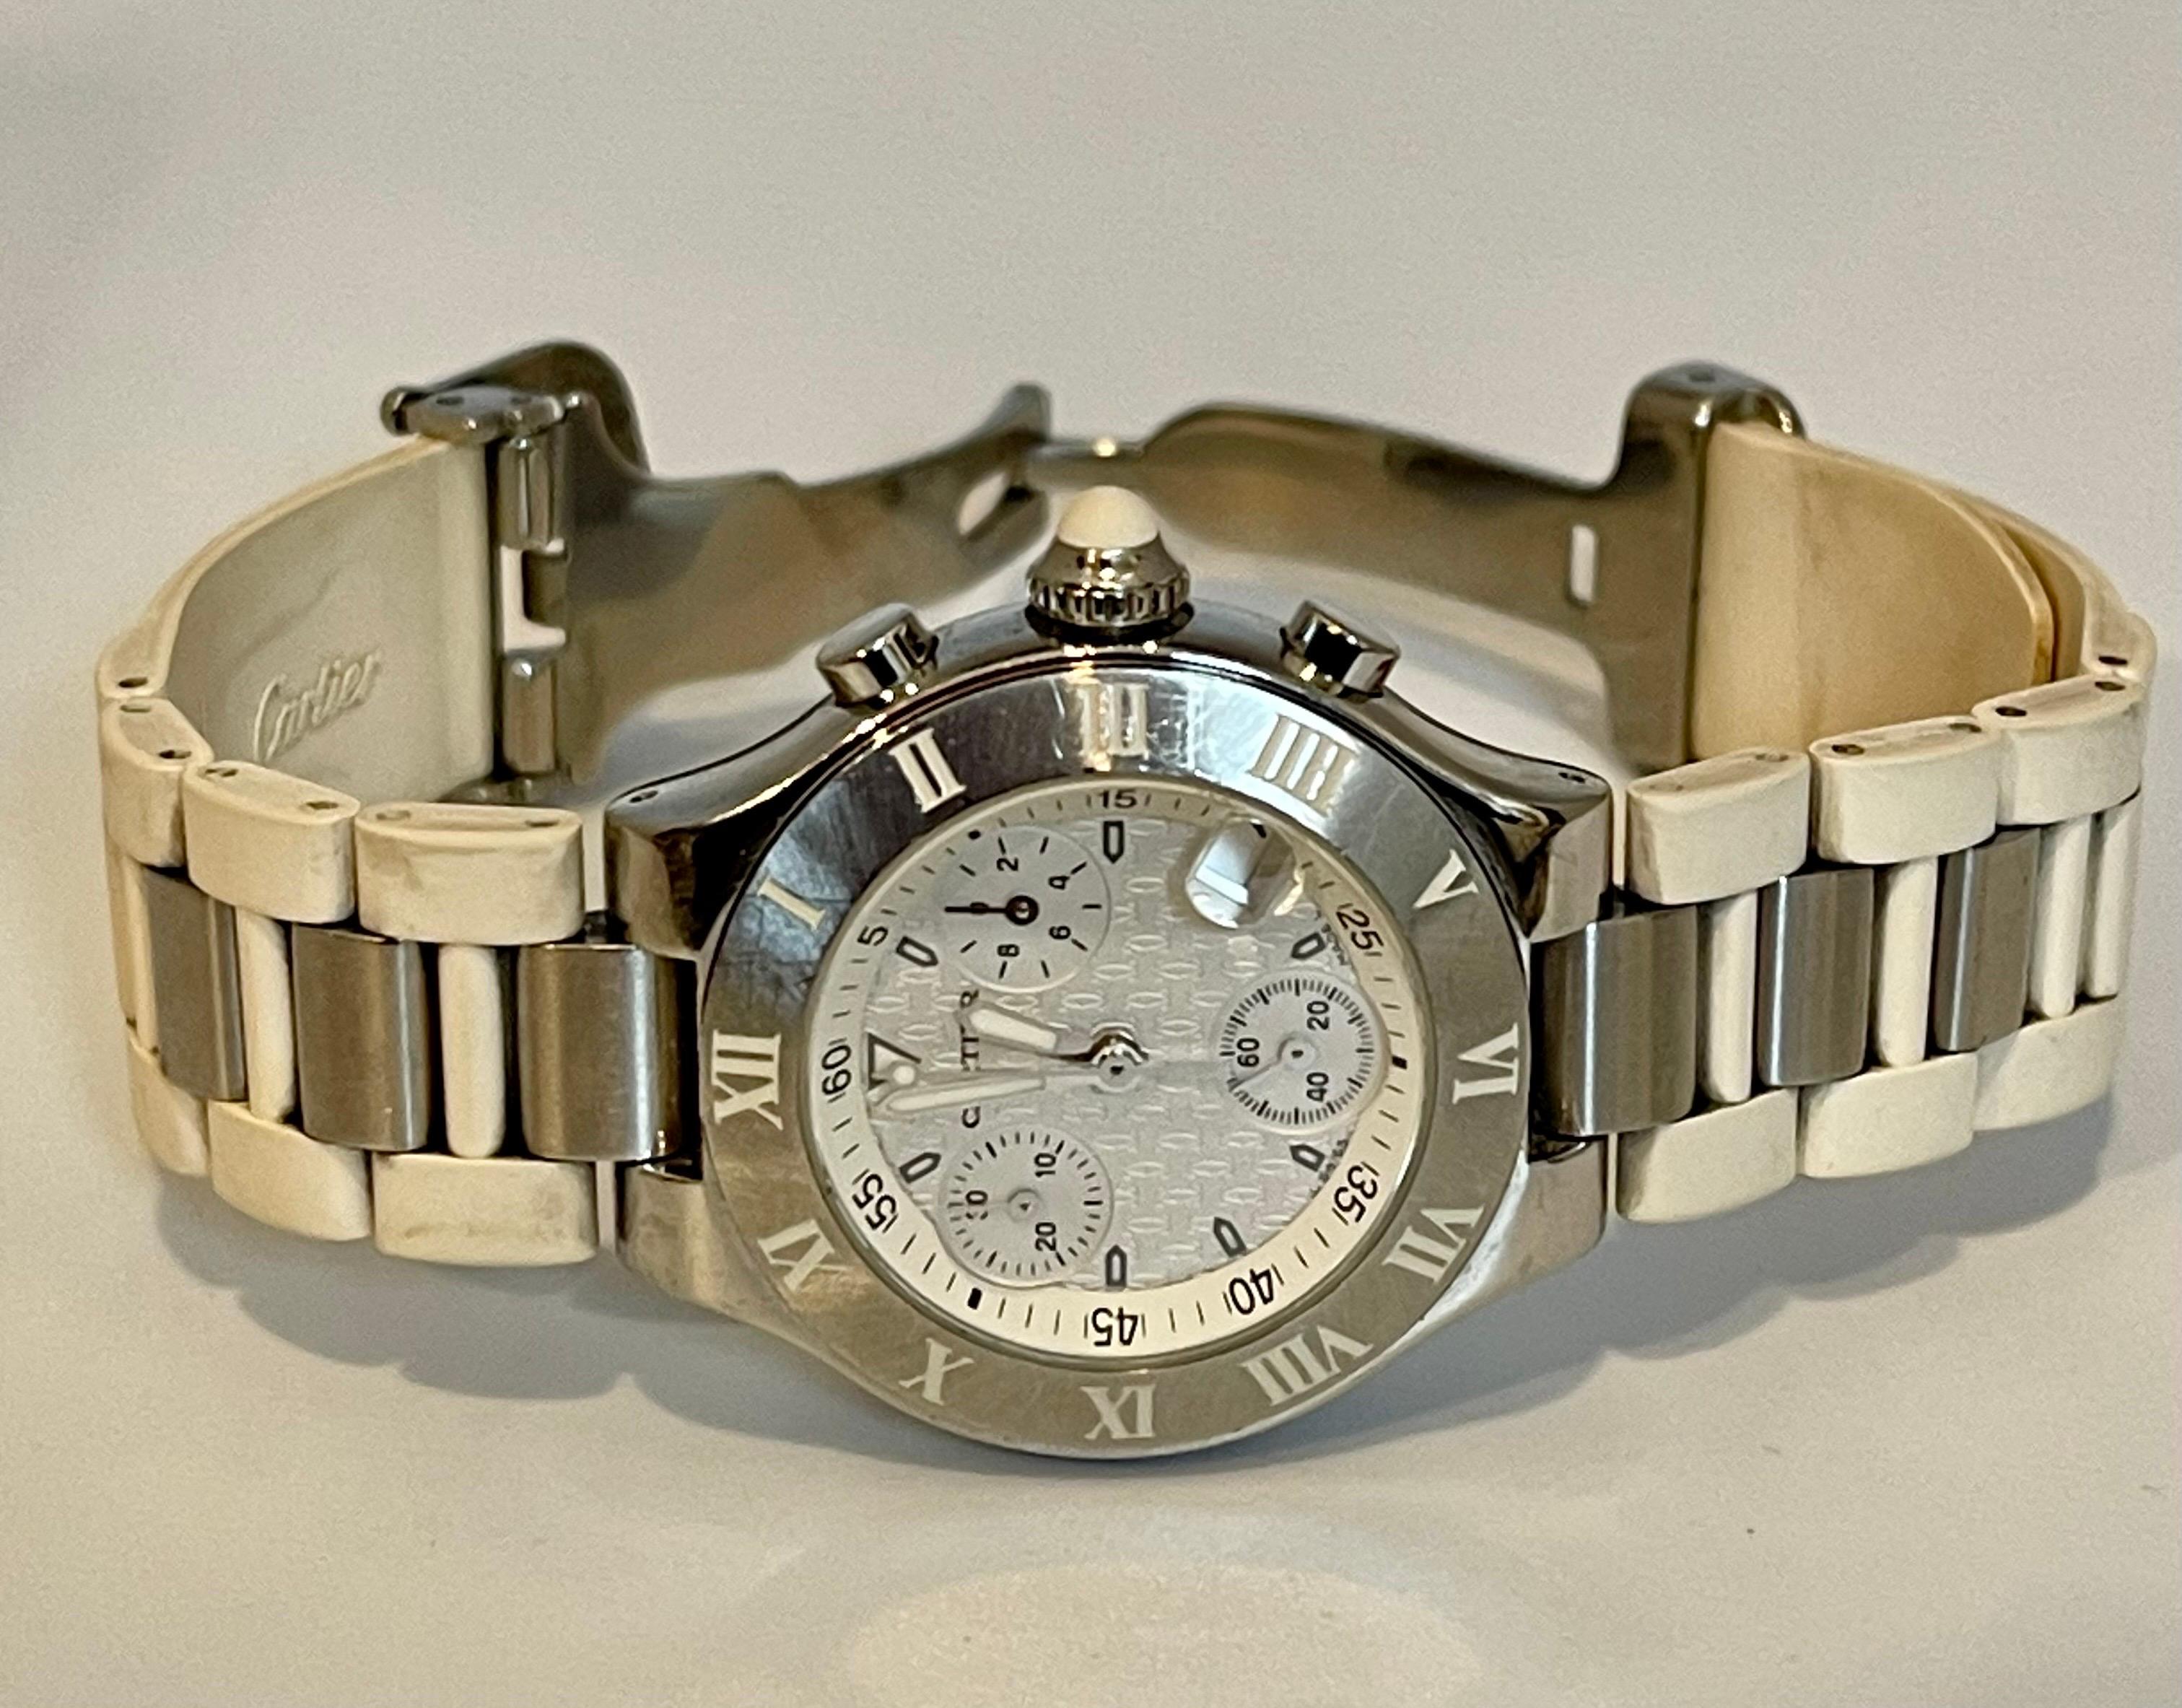 Cartier Chronoscaph 2996 Ladies Steel Chronograph Date 32MM Quartz Watch

Movement	Quartz
Clasp/ Buckle Material	Stainless Steel
Total Weight	64 gr.
Bezel Diameter	29 mm 
Case Length with Lugs	36 mm
Case Width with Crown	94 mm
Crown